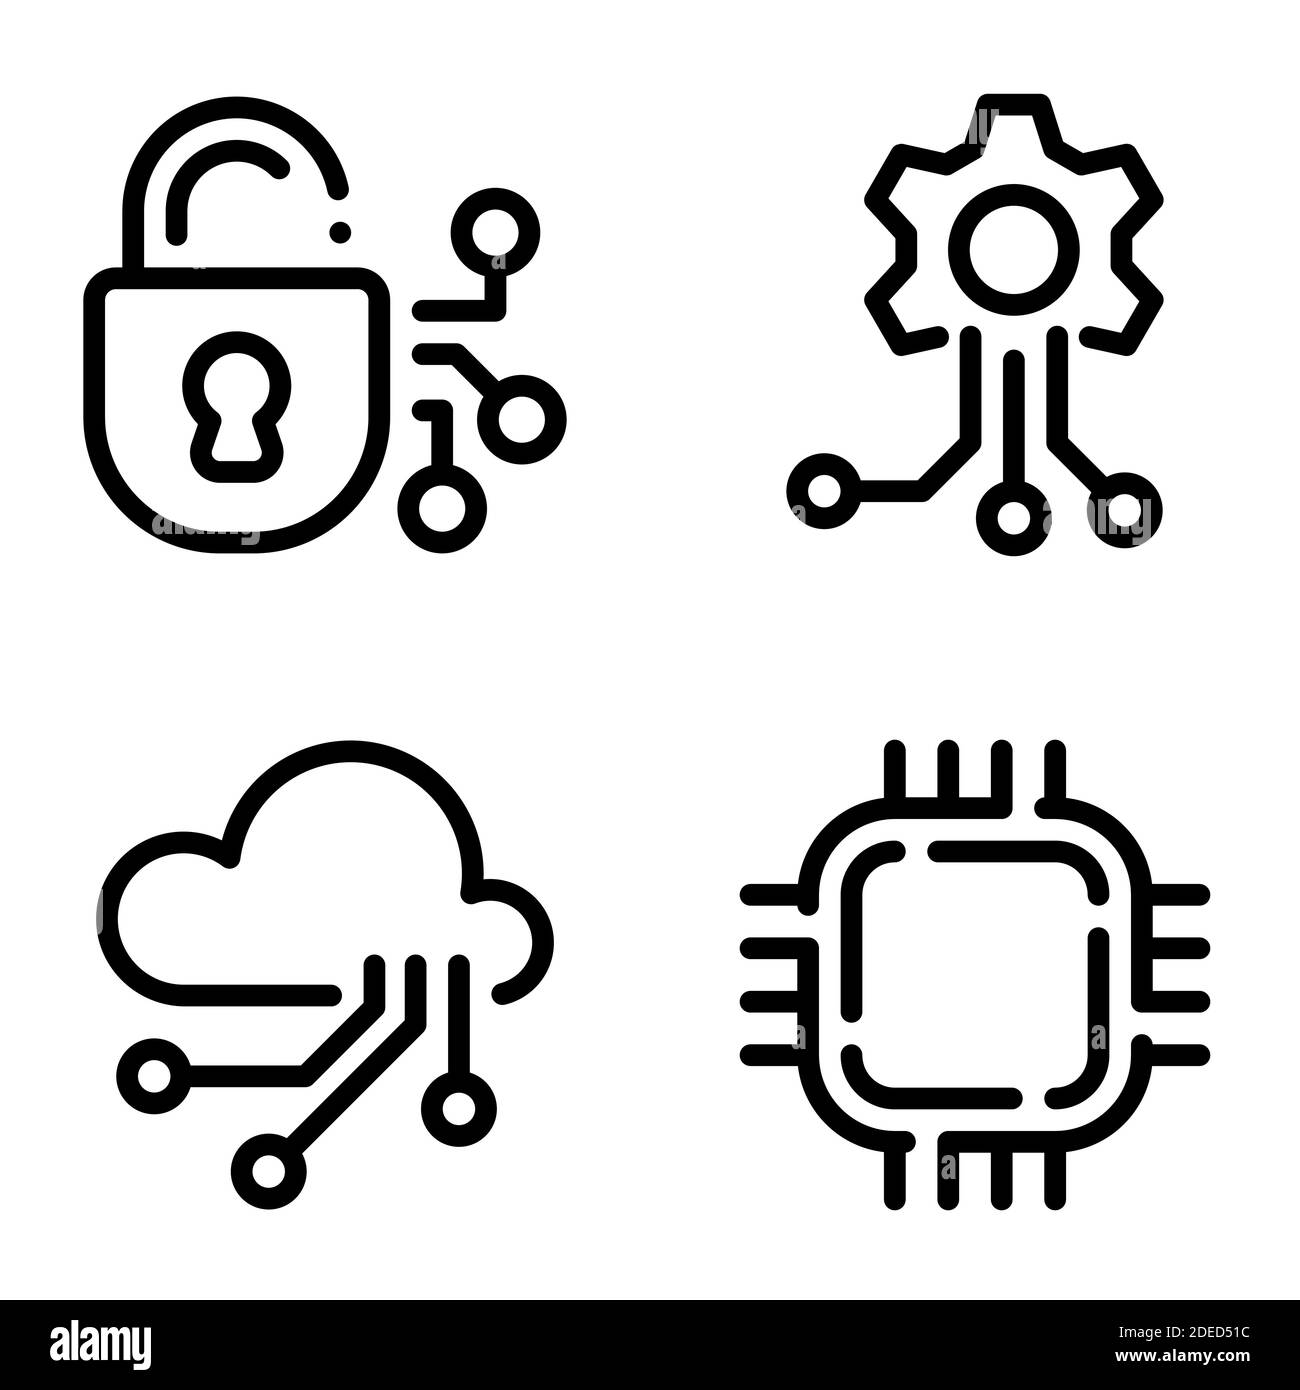 Set of black icons isolated on white background, on theme Intelligent security technologies Stock Vector